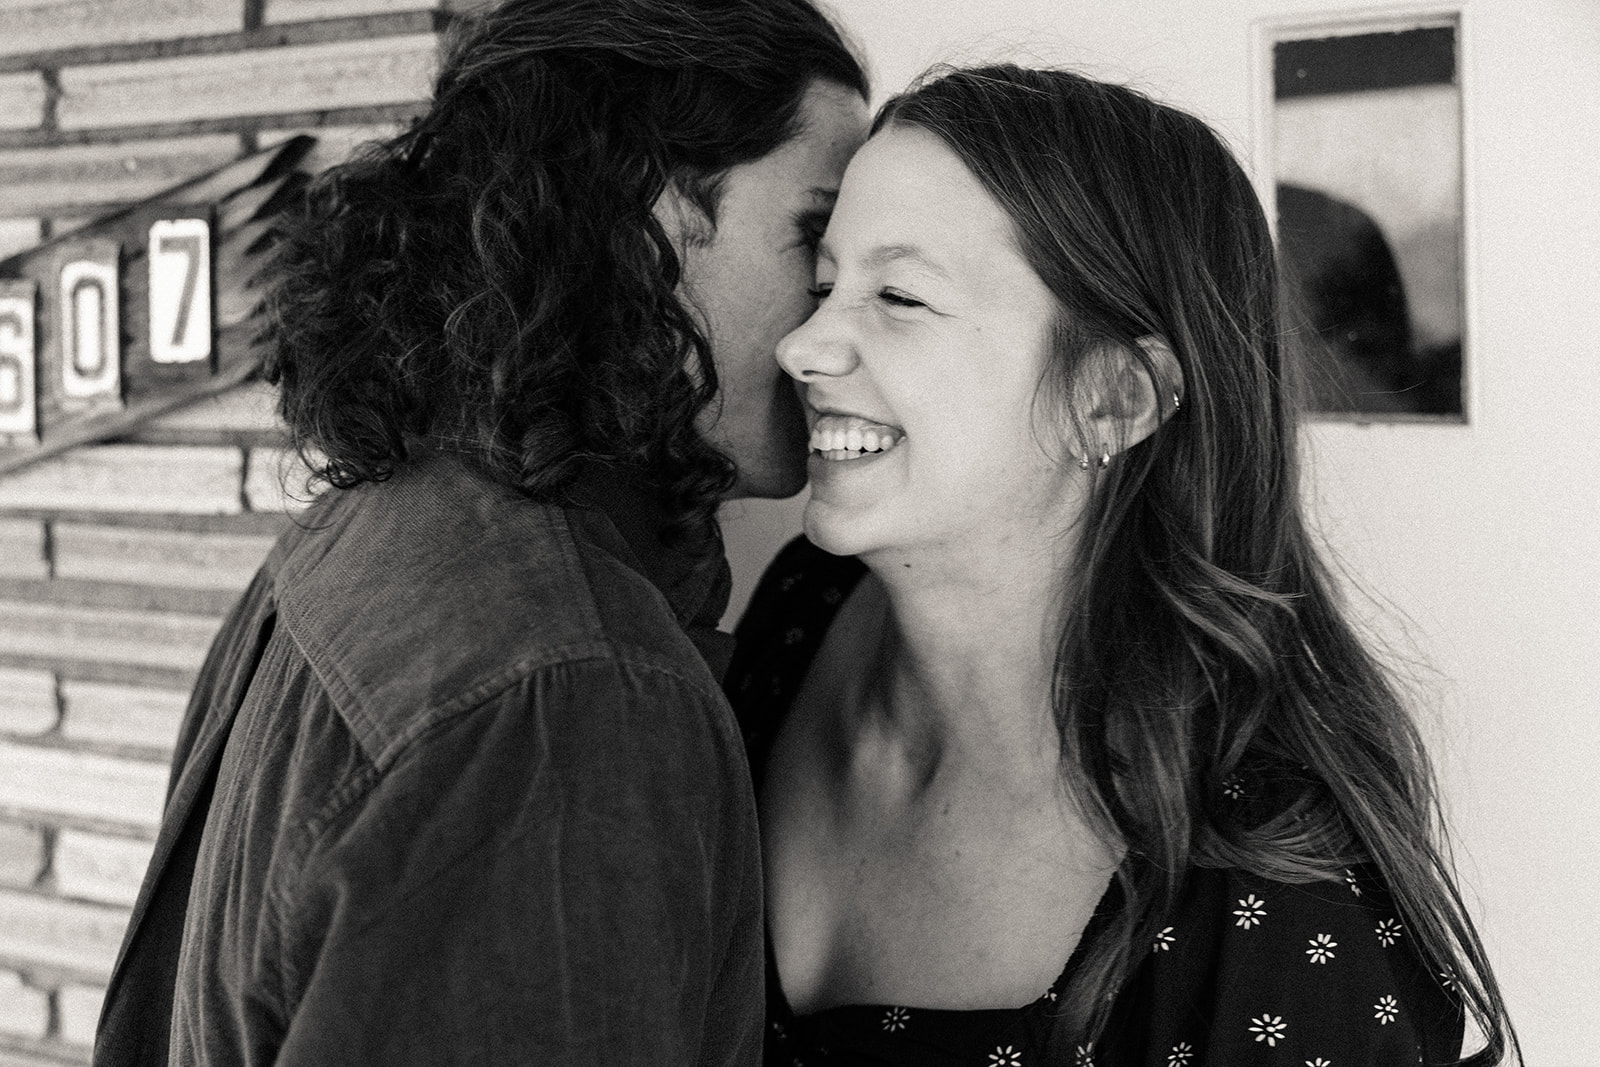 woman smiling while her fiance kisses her cheek 